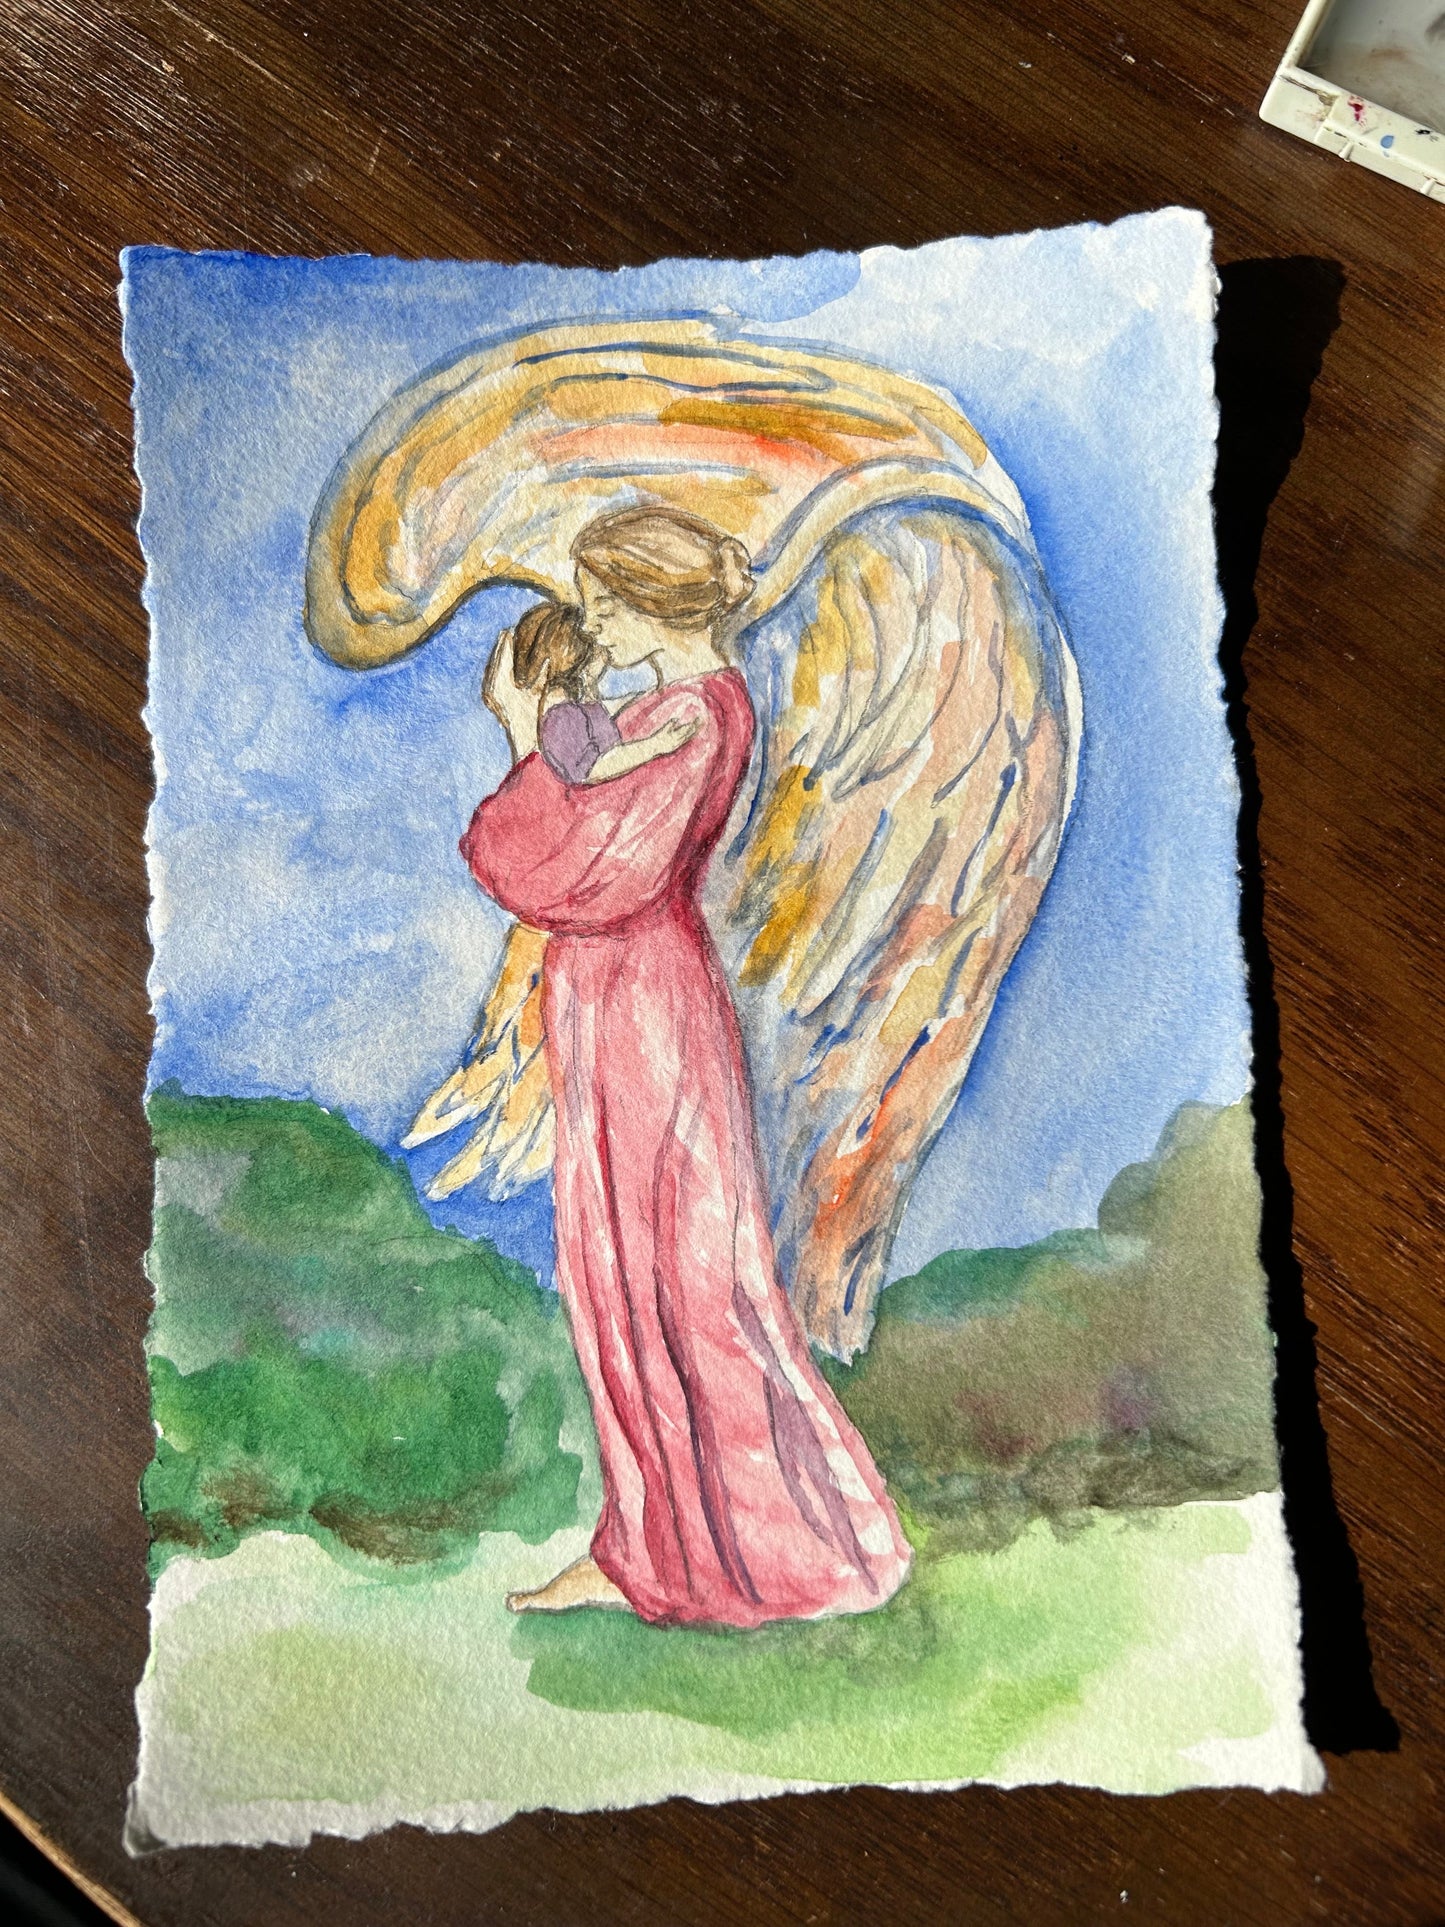 Saint Series: Original of Sacred Protection- The Guardian Angel and little one